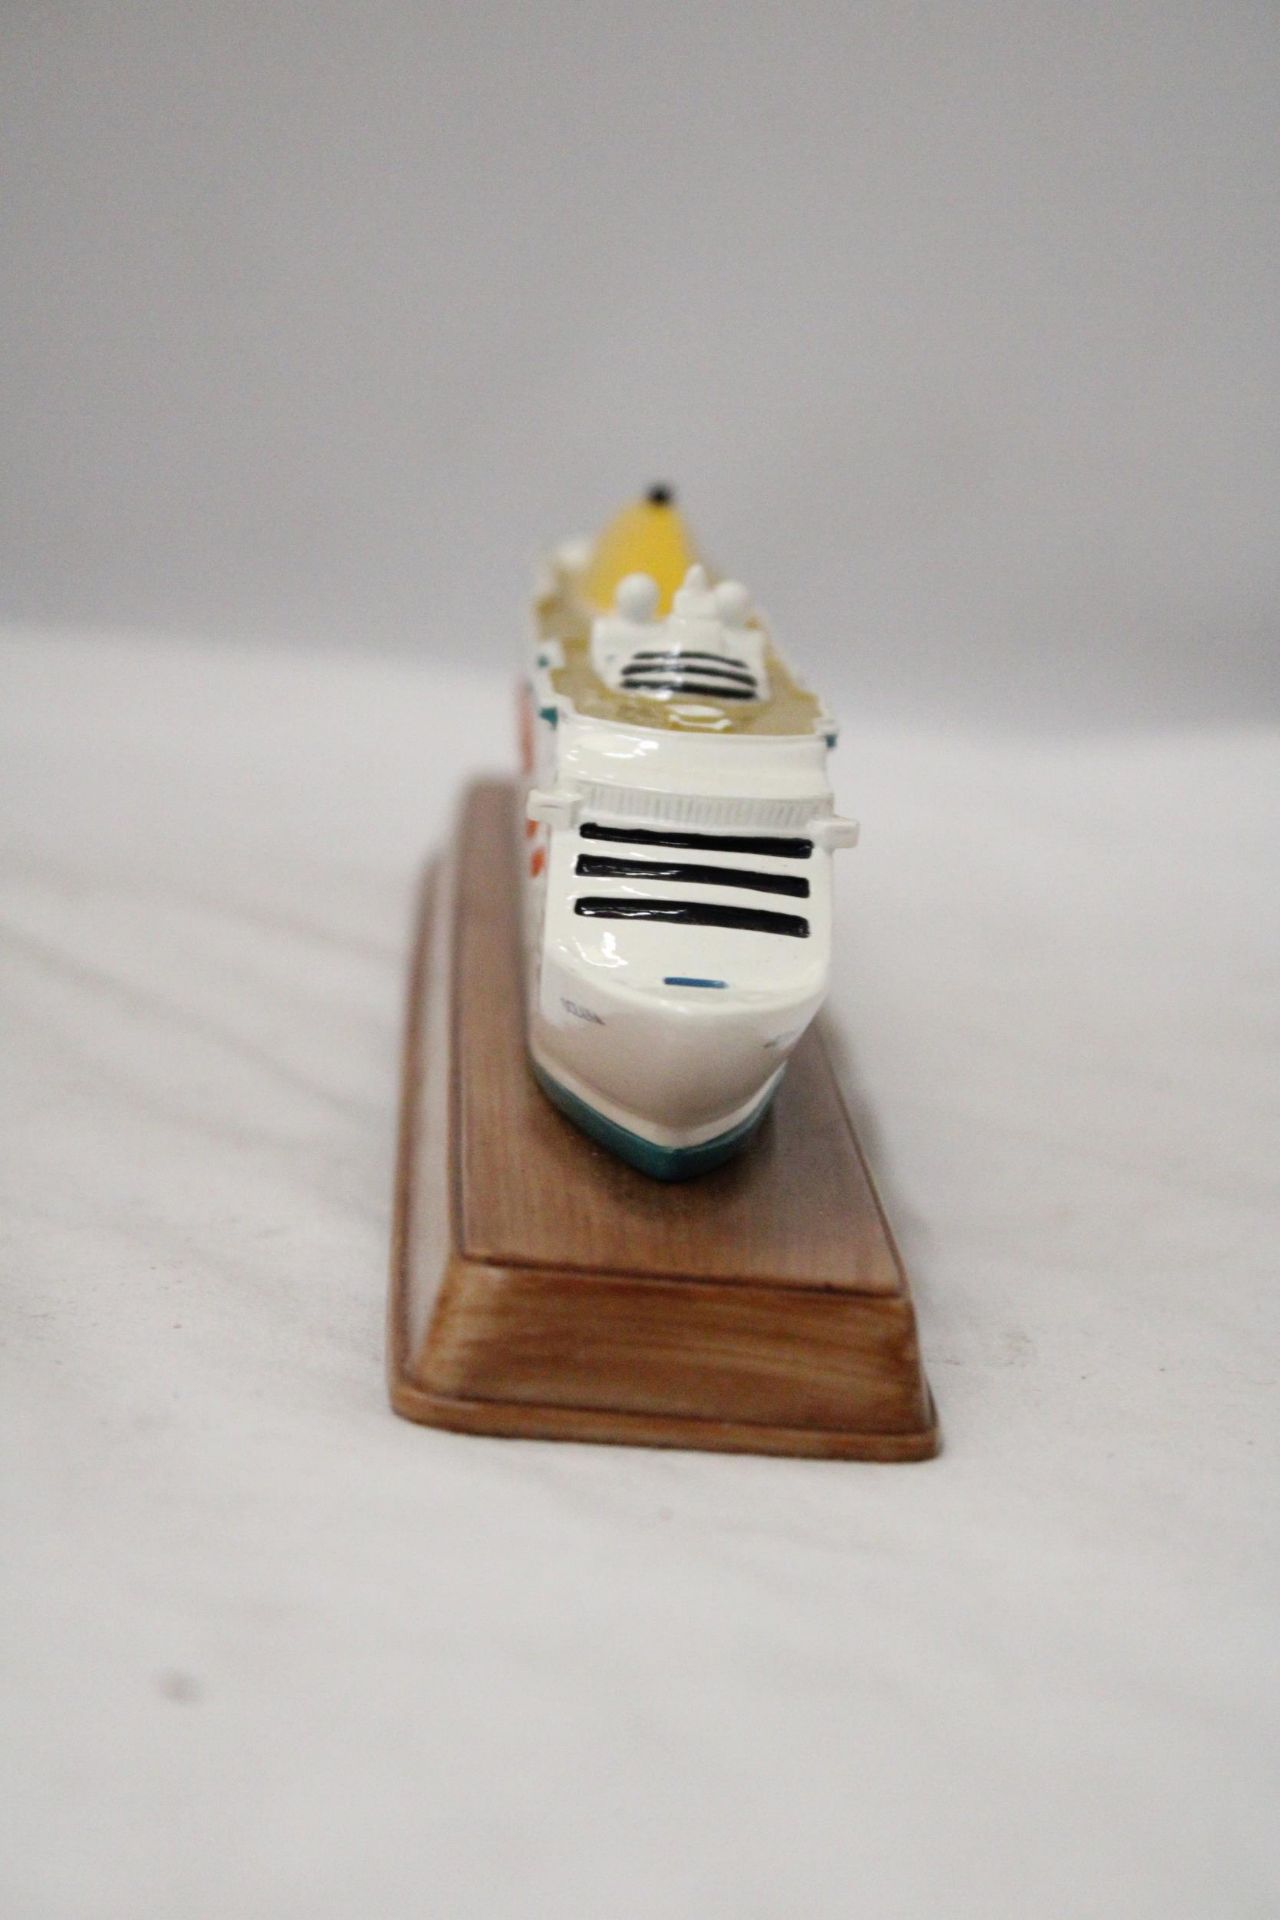 A HEAVY, SOLID, OCEAN LINER ON WOODEN STAND, 'OCEANA', LENGTH 27CM, HEIGHT 6CM - Image 3 of 6